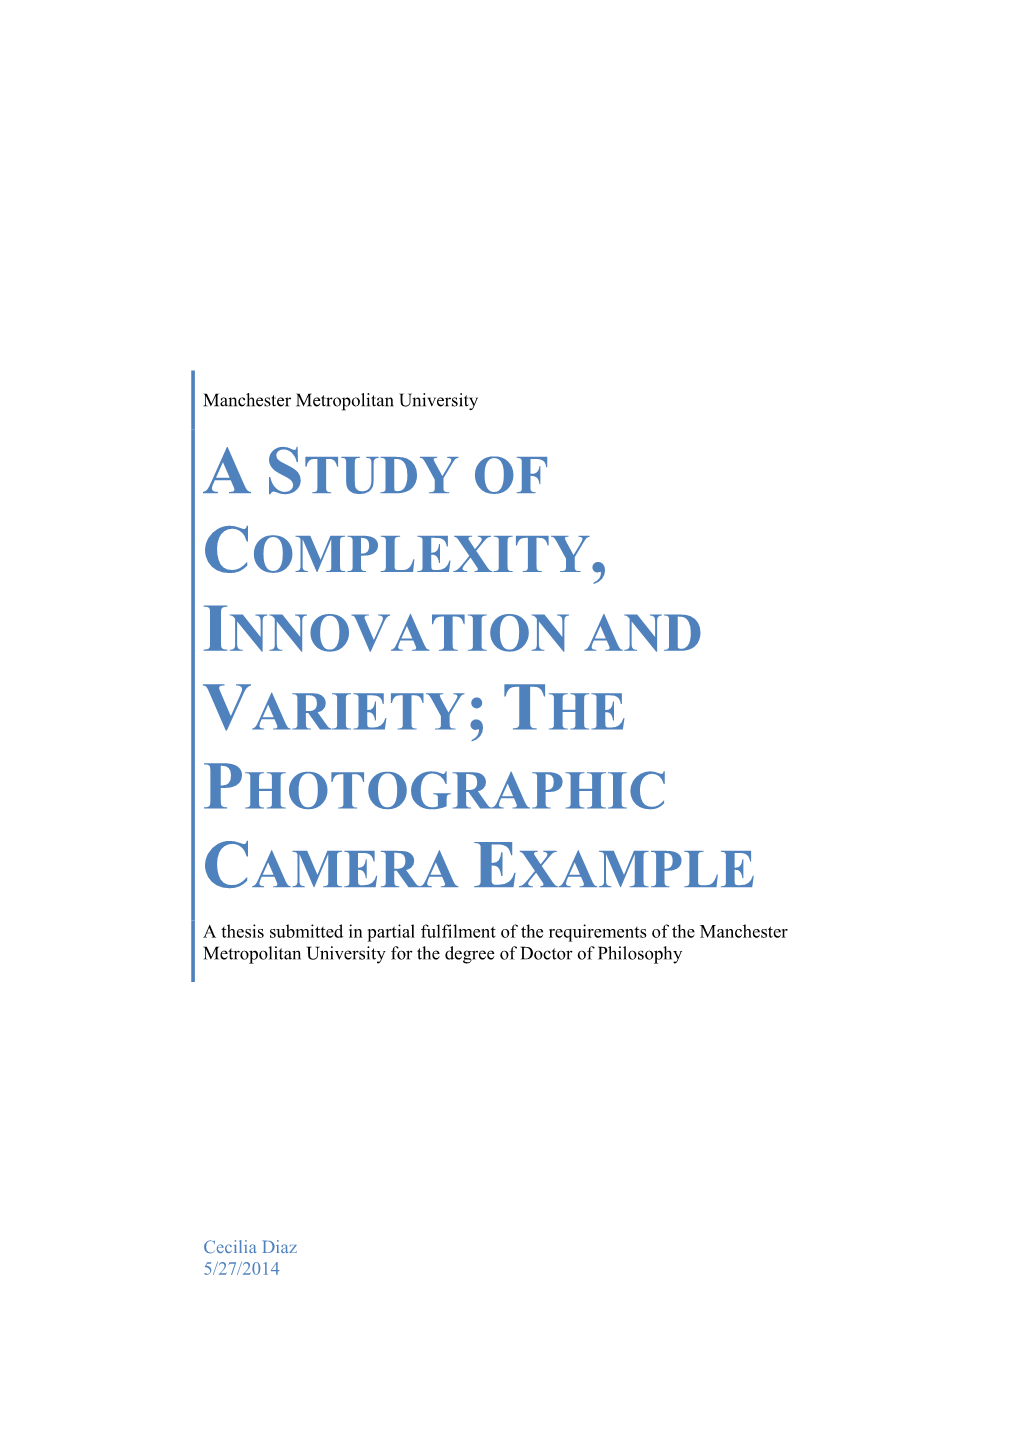 A Study of Complexity, Innovation and Variety; the Photographic Camera Example